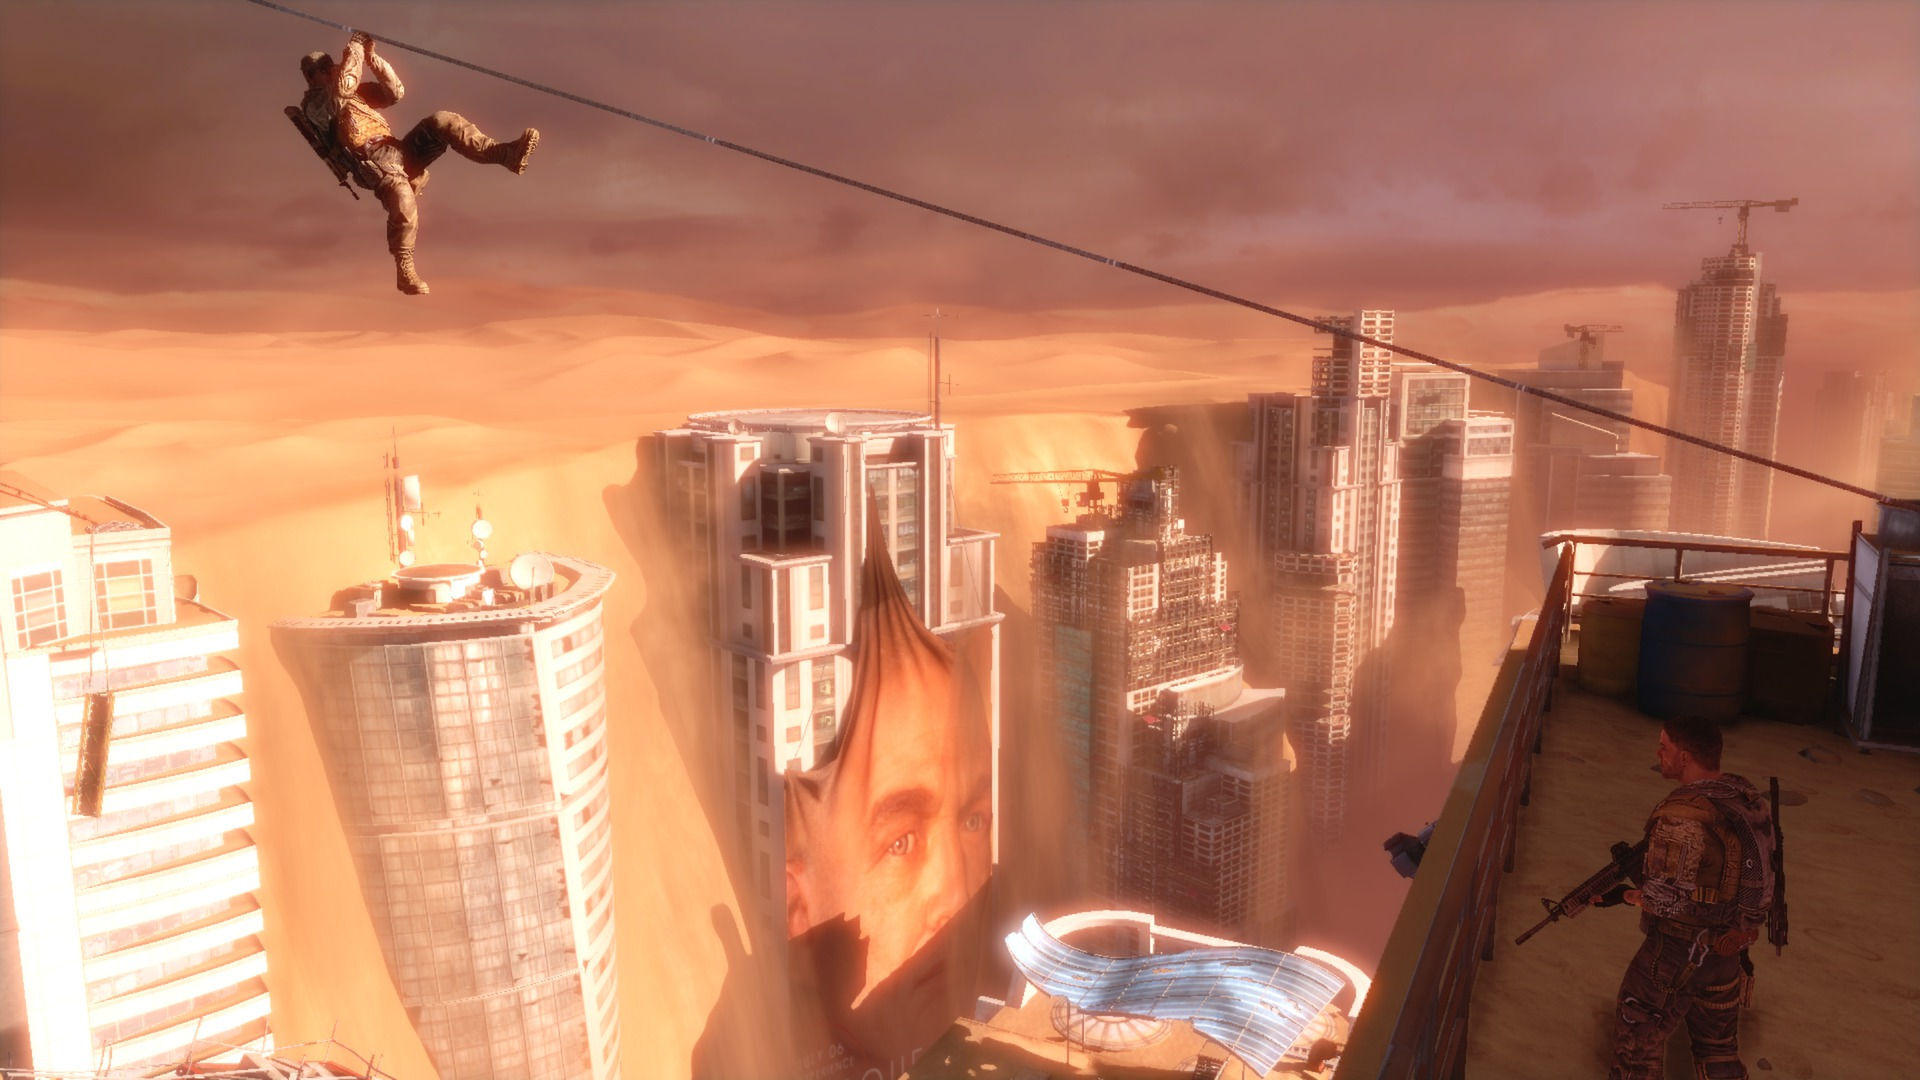 A screenshot from "Spec Ops: The Line:" a soldier slides down a zipline over a destroyed Dubai of tall skyscrapers and orange sand